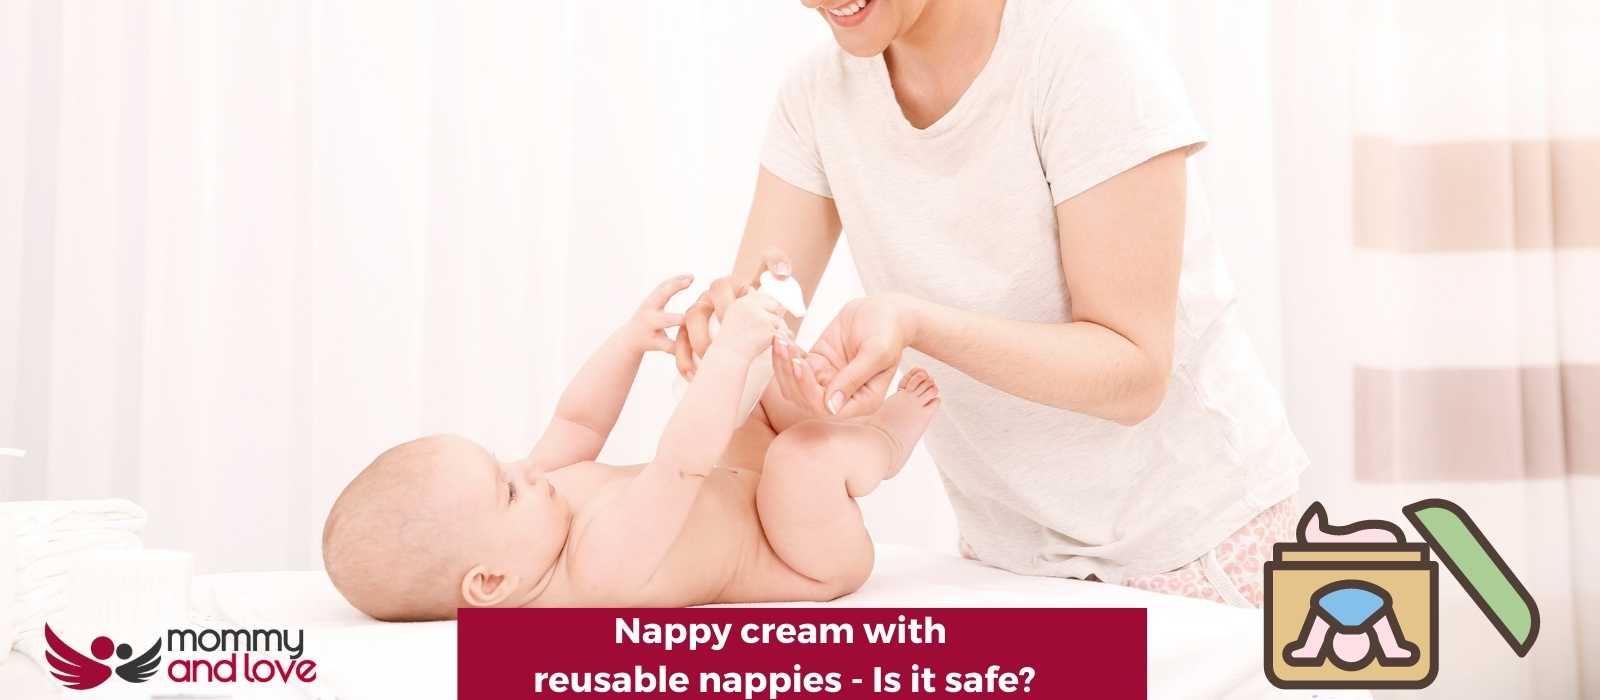 Nappy cream with reusable nappies - Is it safe